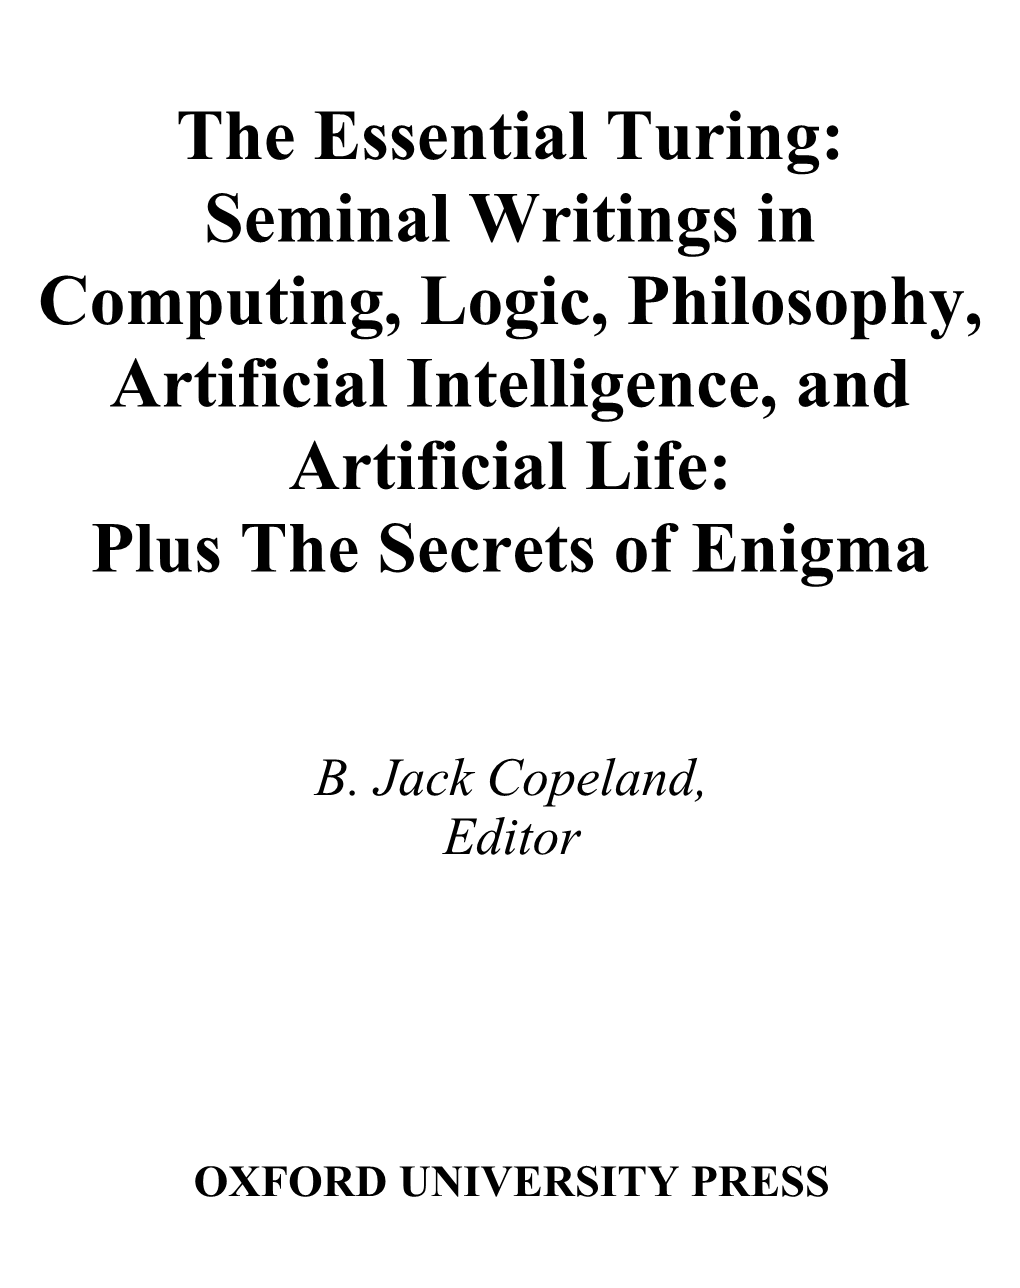 The Essential Turing : Seminal Writings in Computing, Logic, Philosophy, Artificial Intelligence, and Artificial Life, Plus